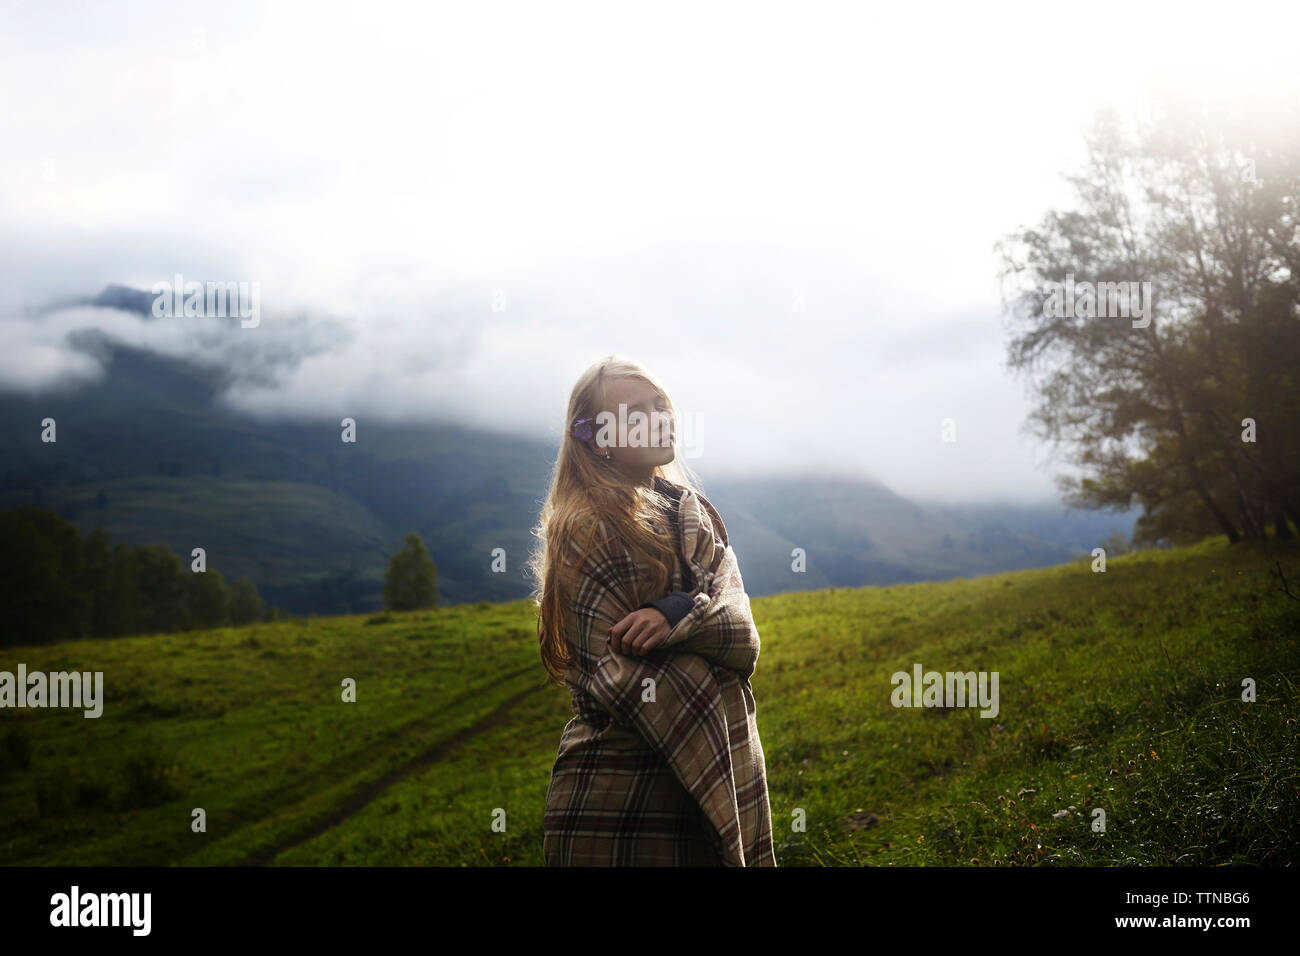 Woman wrapped in a blanket standing on field Stock Photo